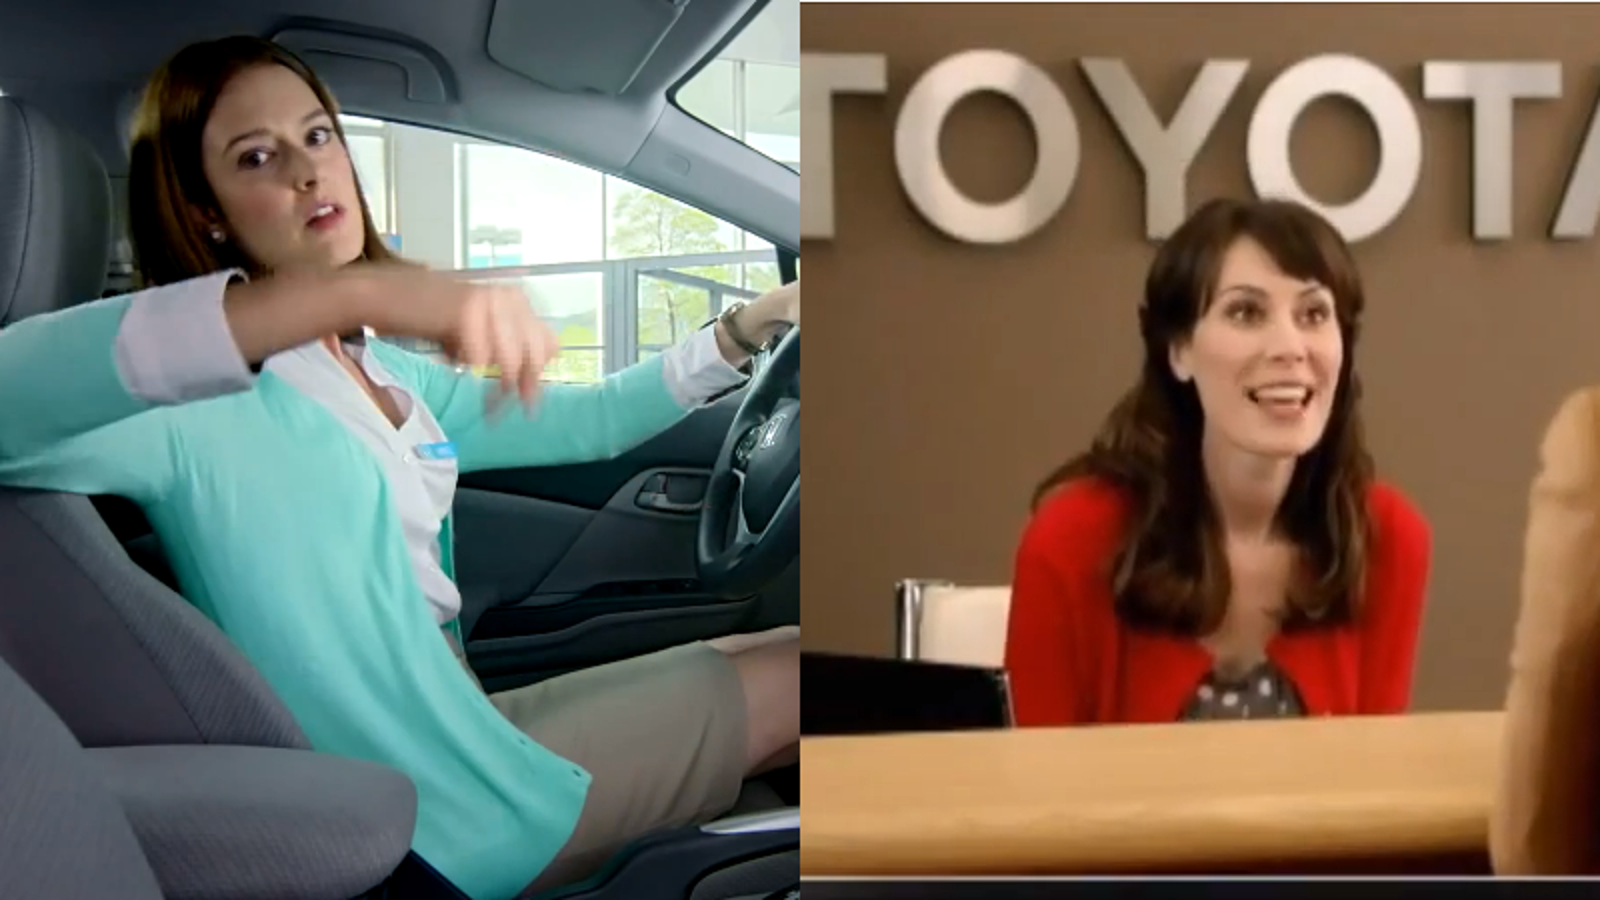 Which Commercial Is More Annoying?